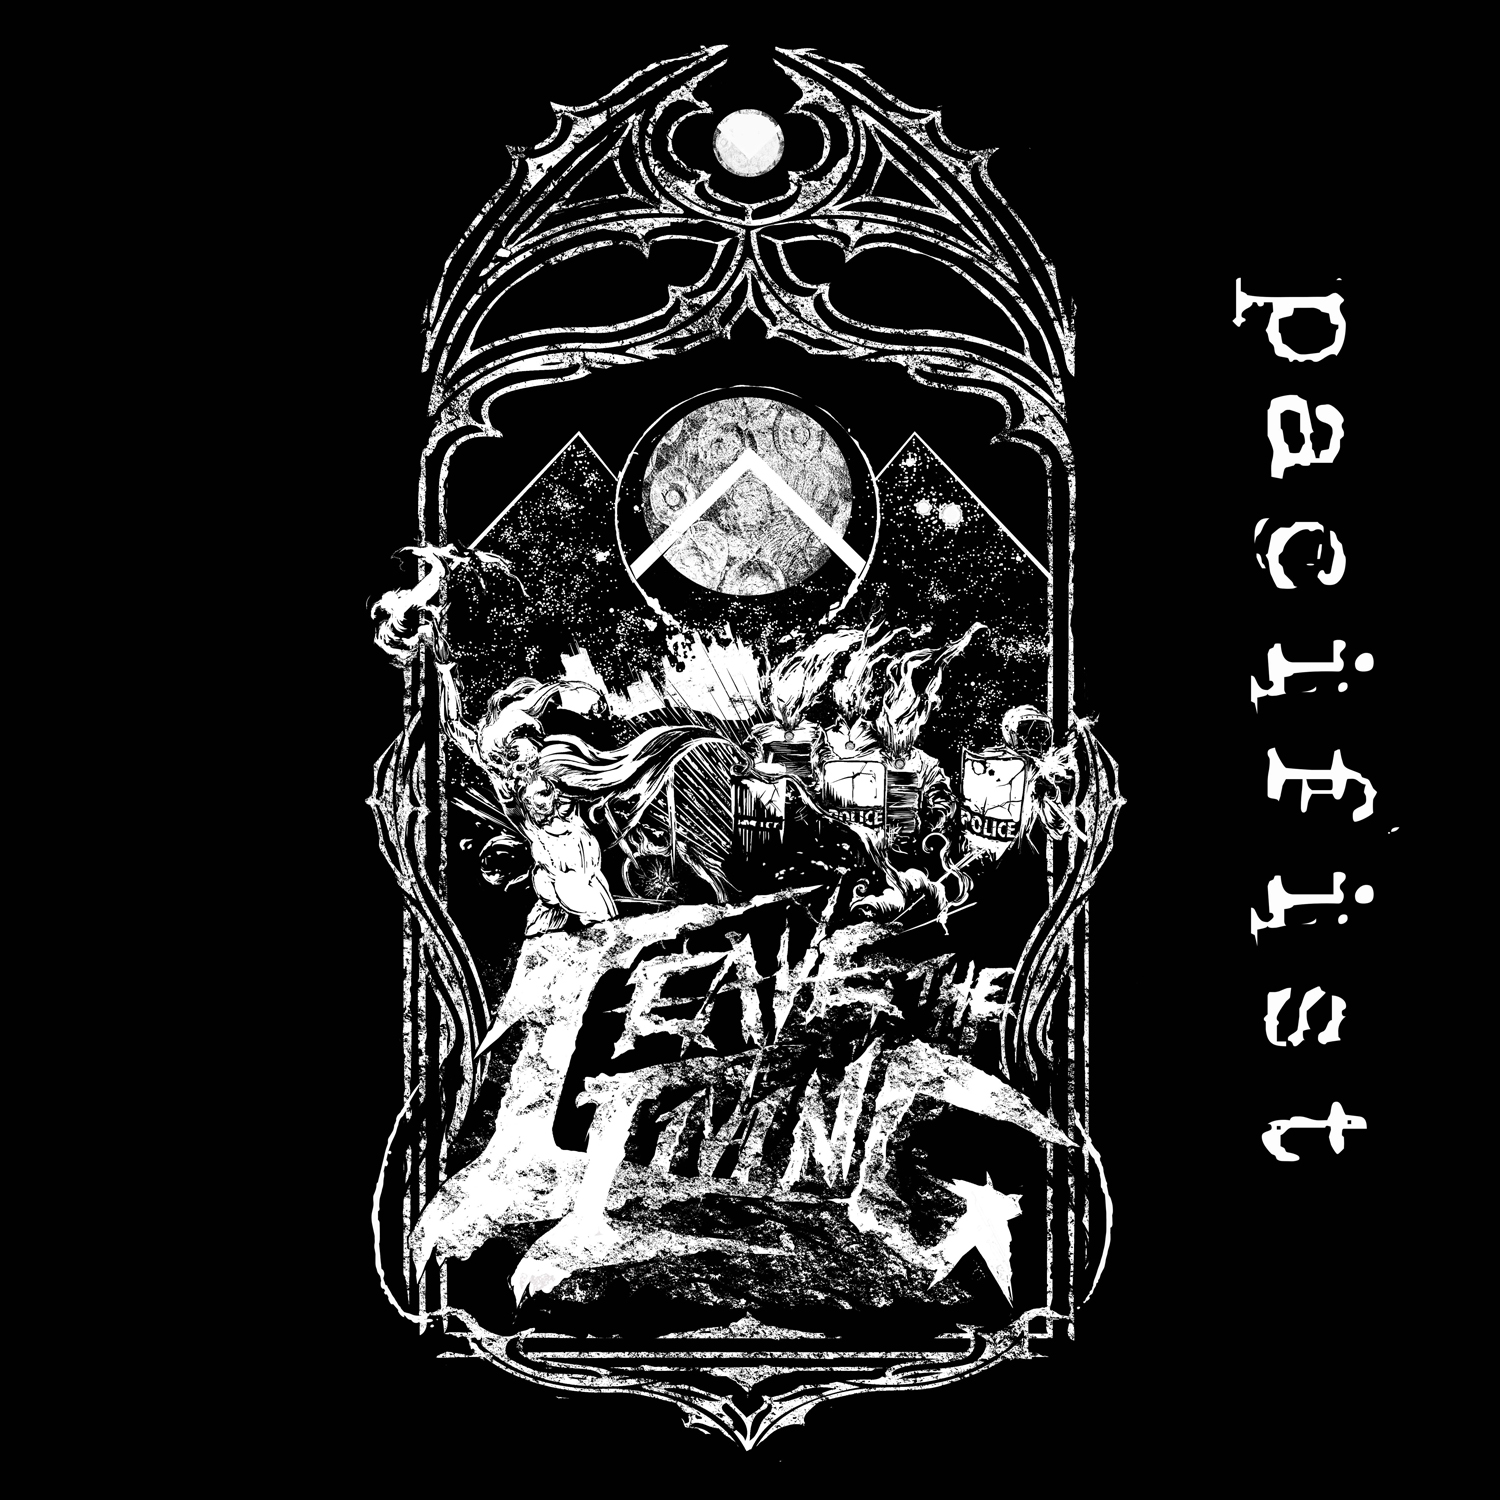 LEAVE THE LIVING Streaming New Track Sink or Swim for Upcoming Debut Album